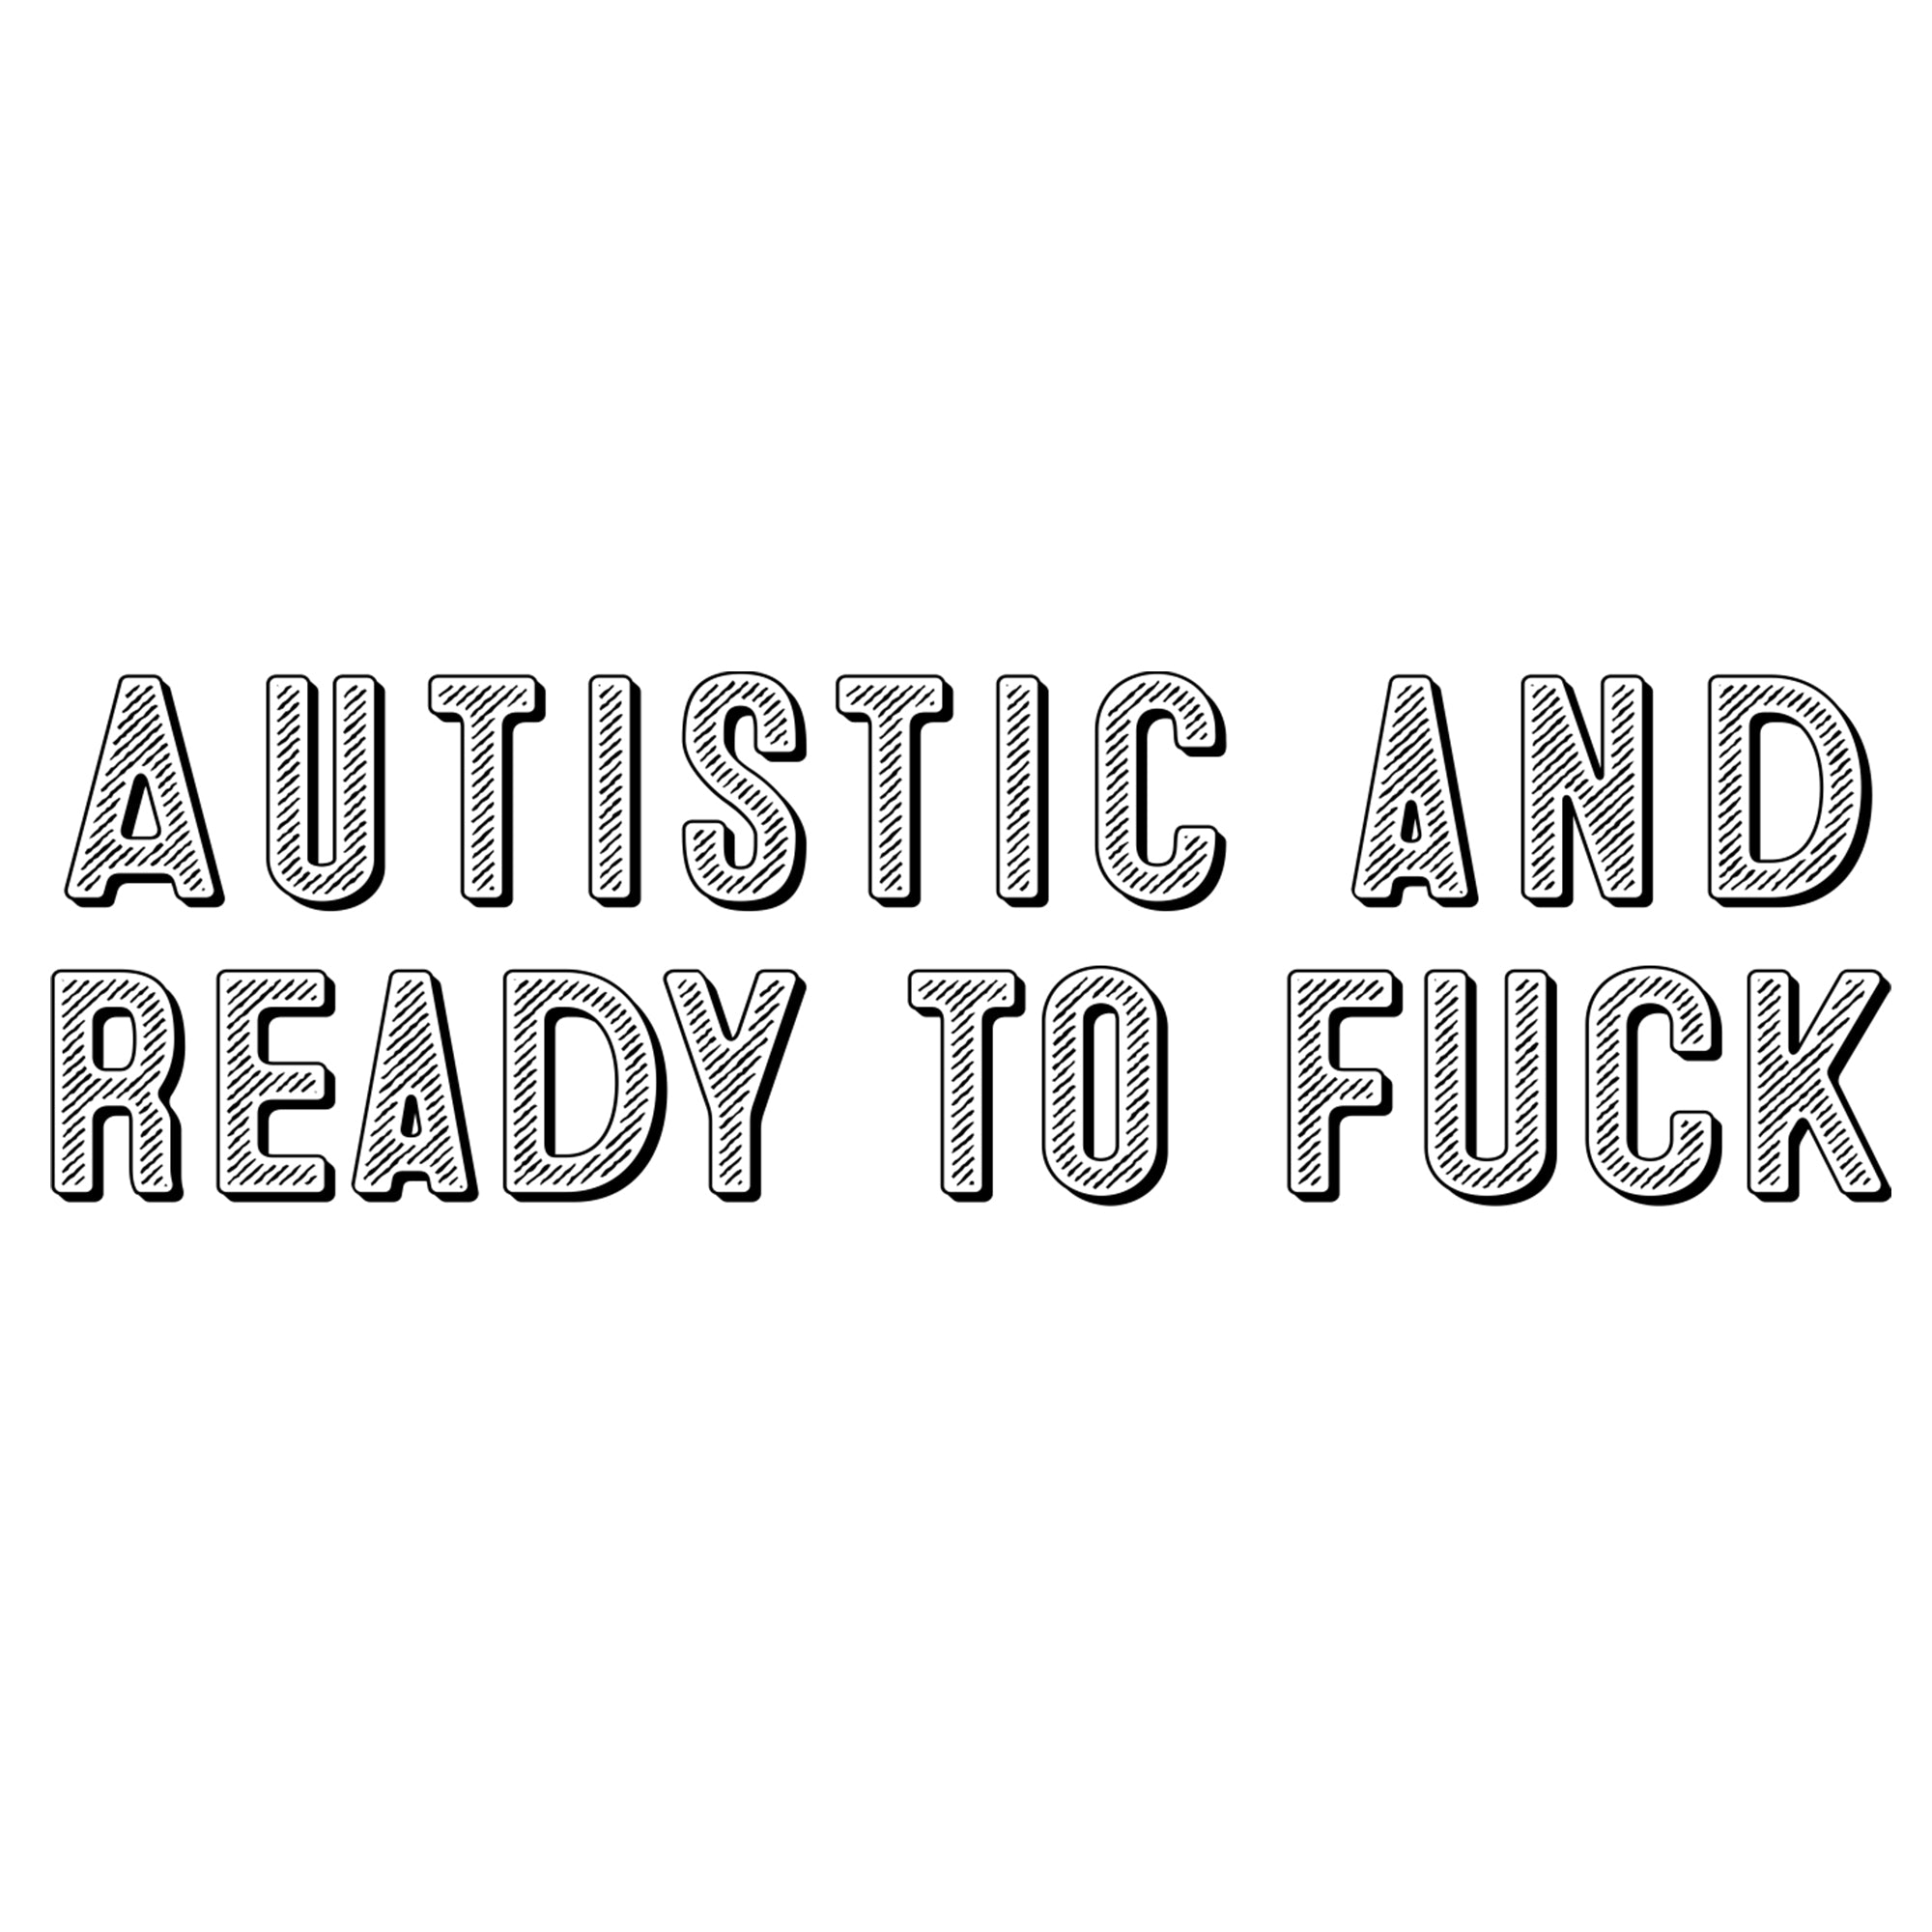 Autistic and Ready To Fuck Tshirt - Donkey Tees